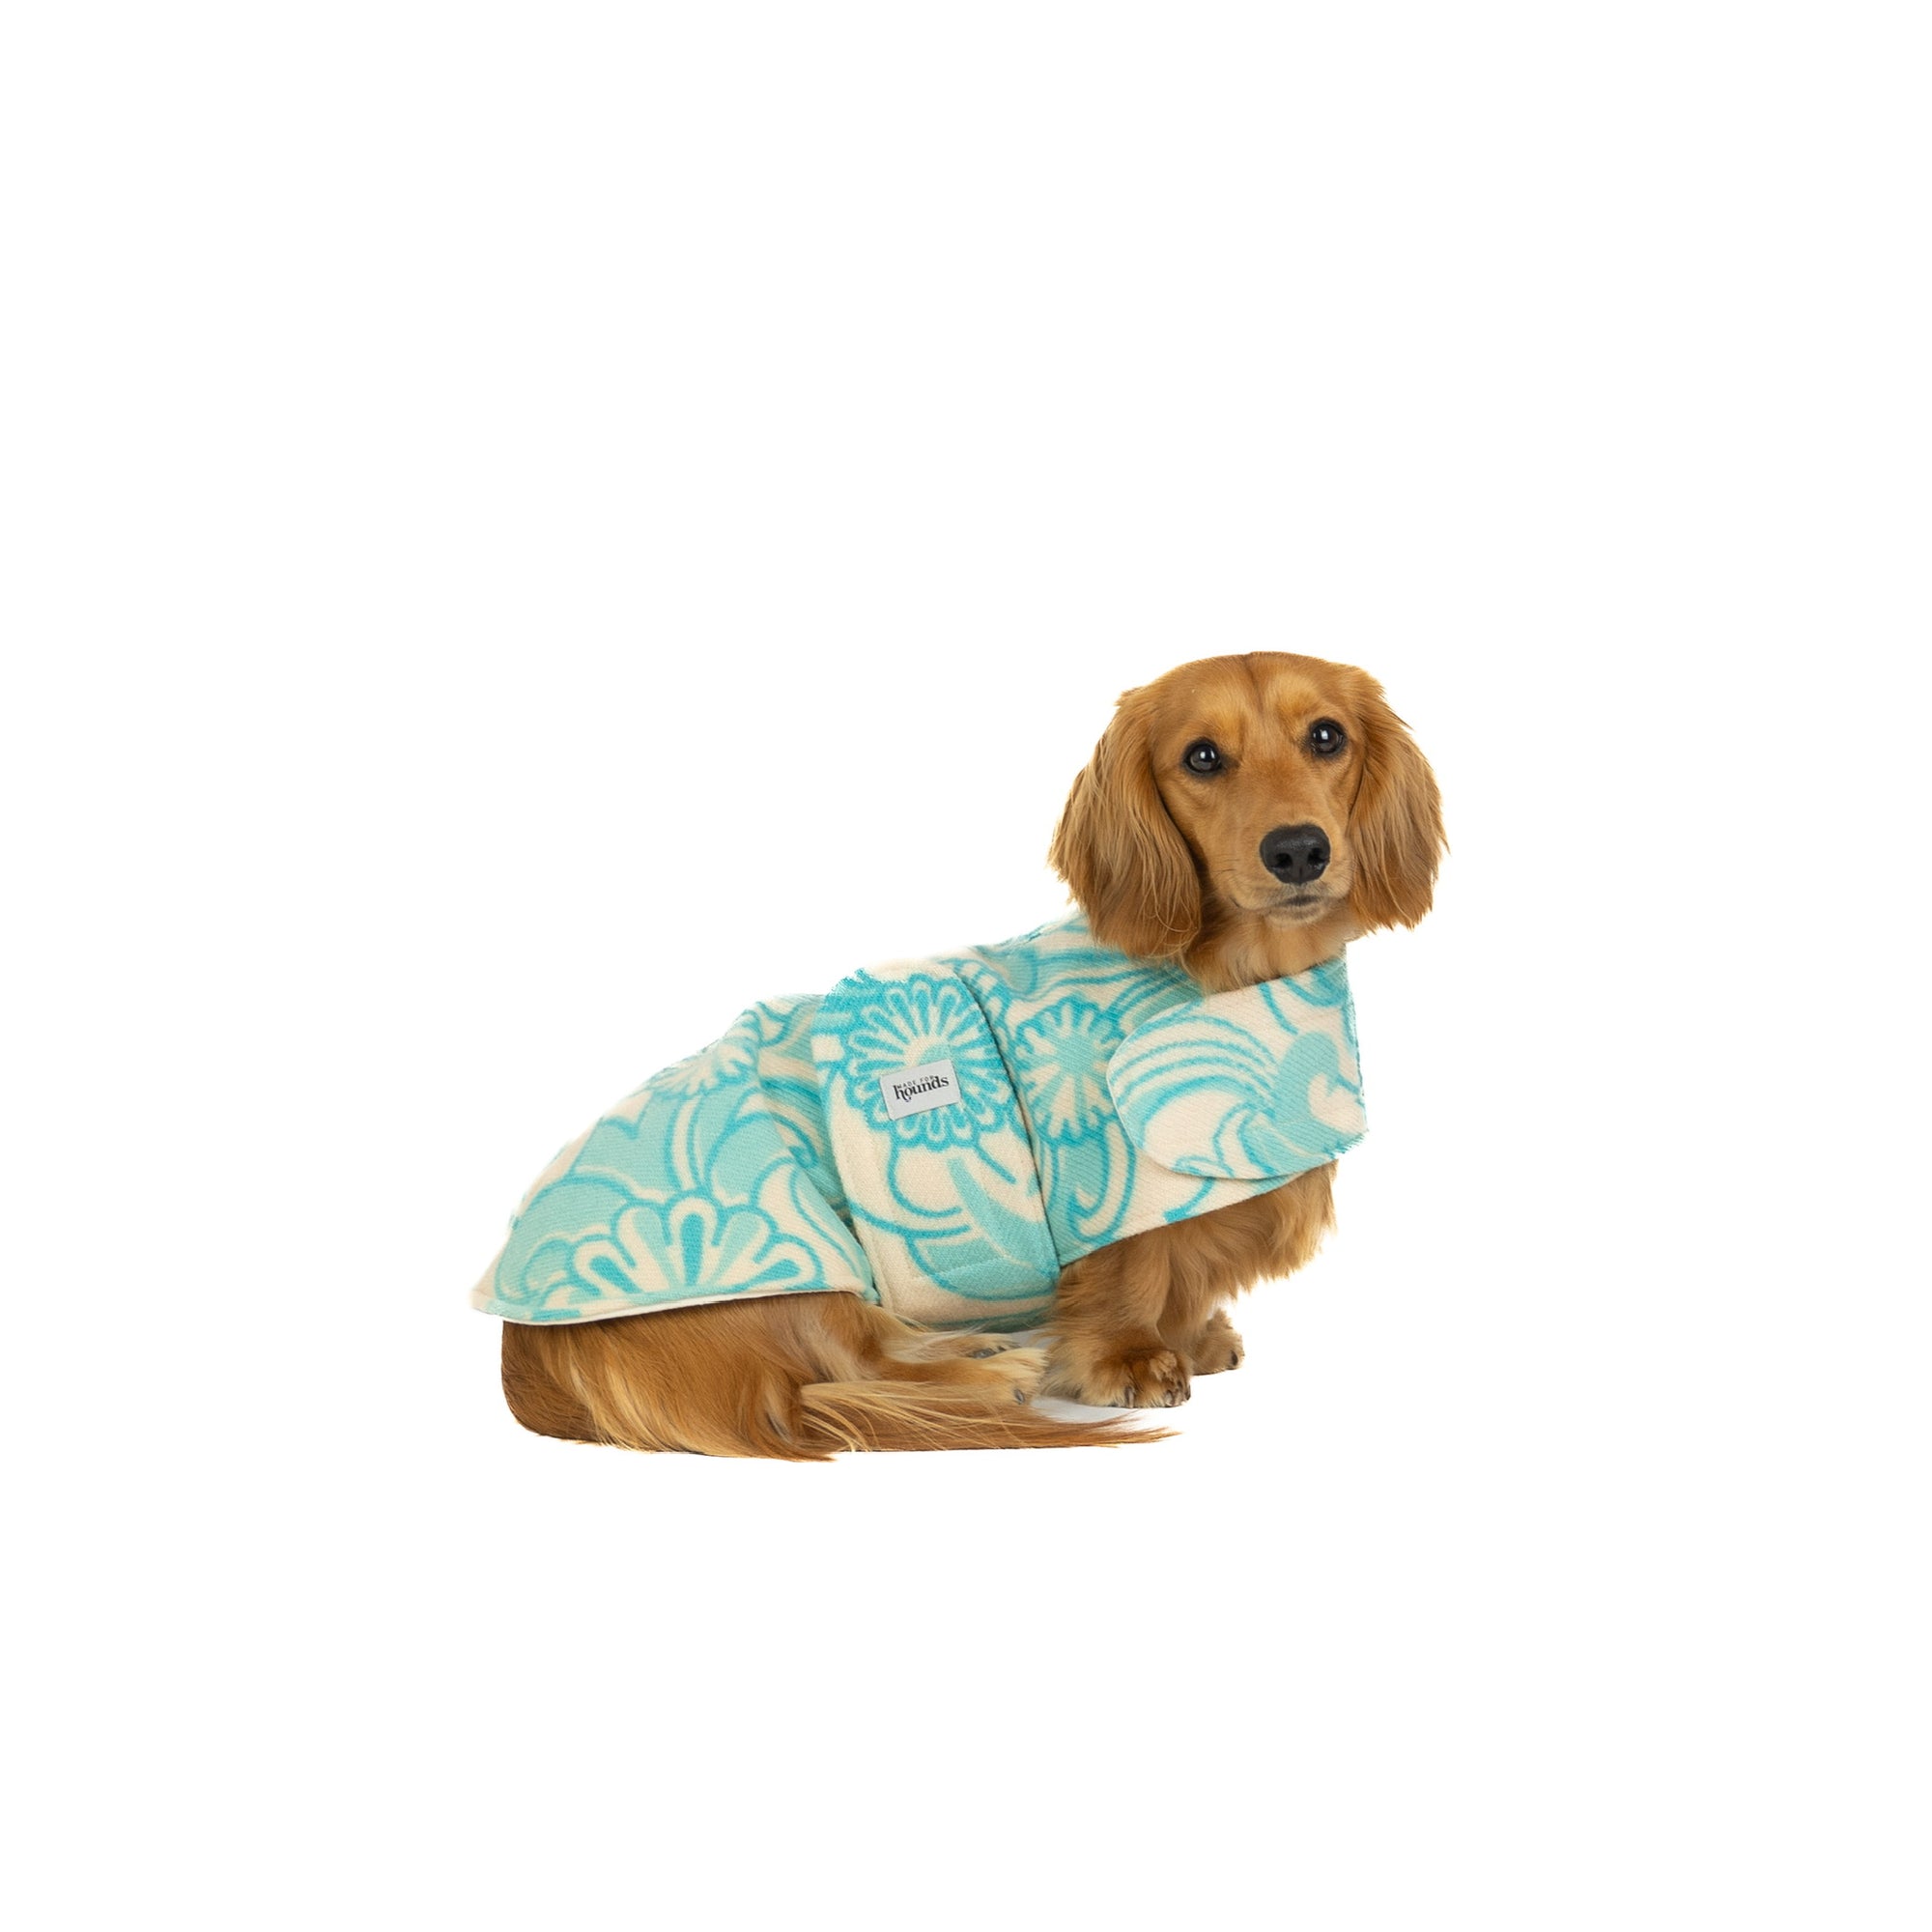 The Vintage Coat - Number 23 (Classic & Dachshund)